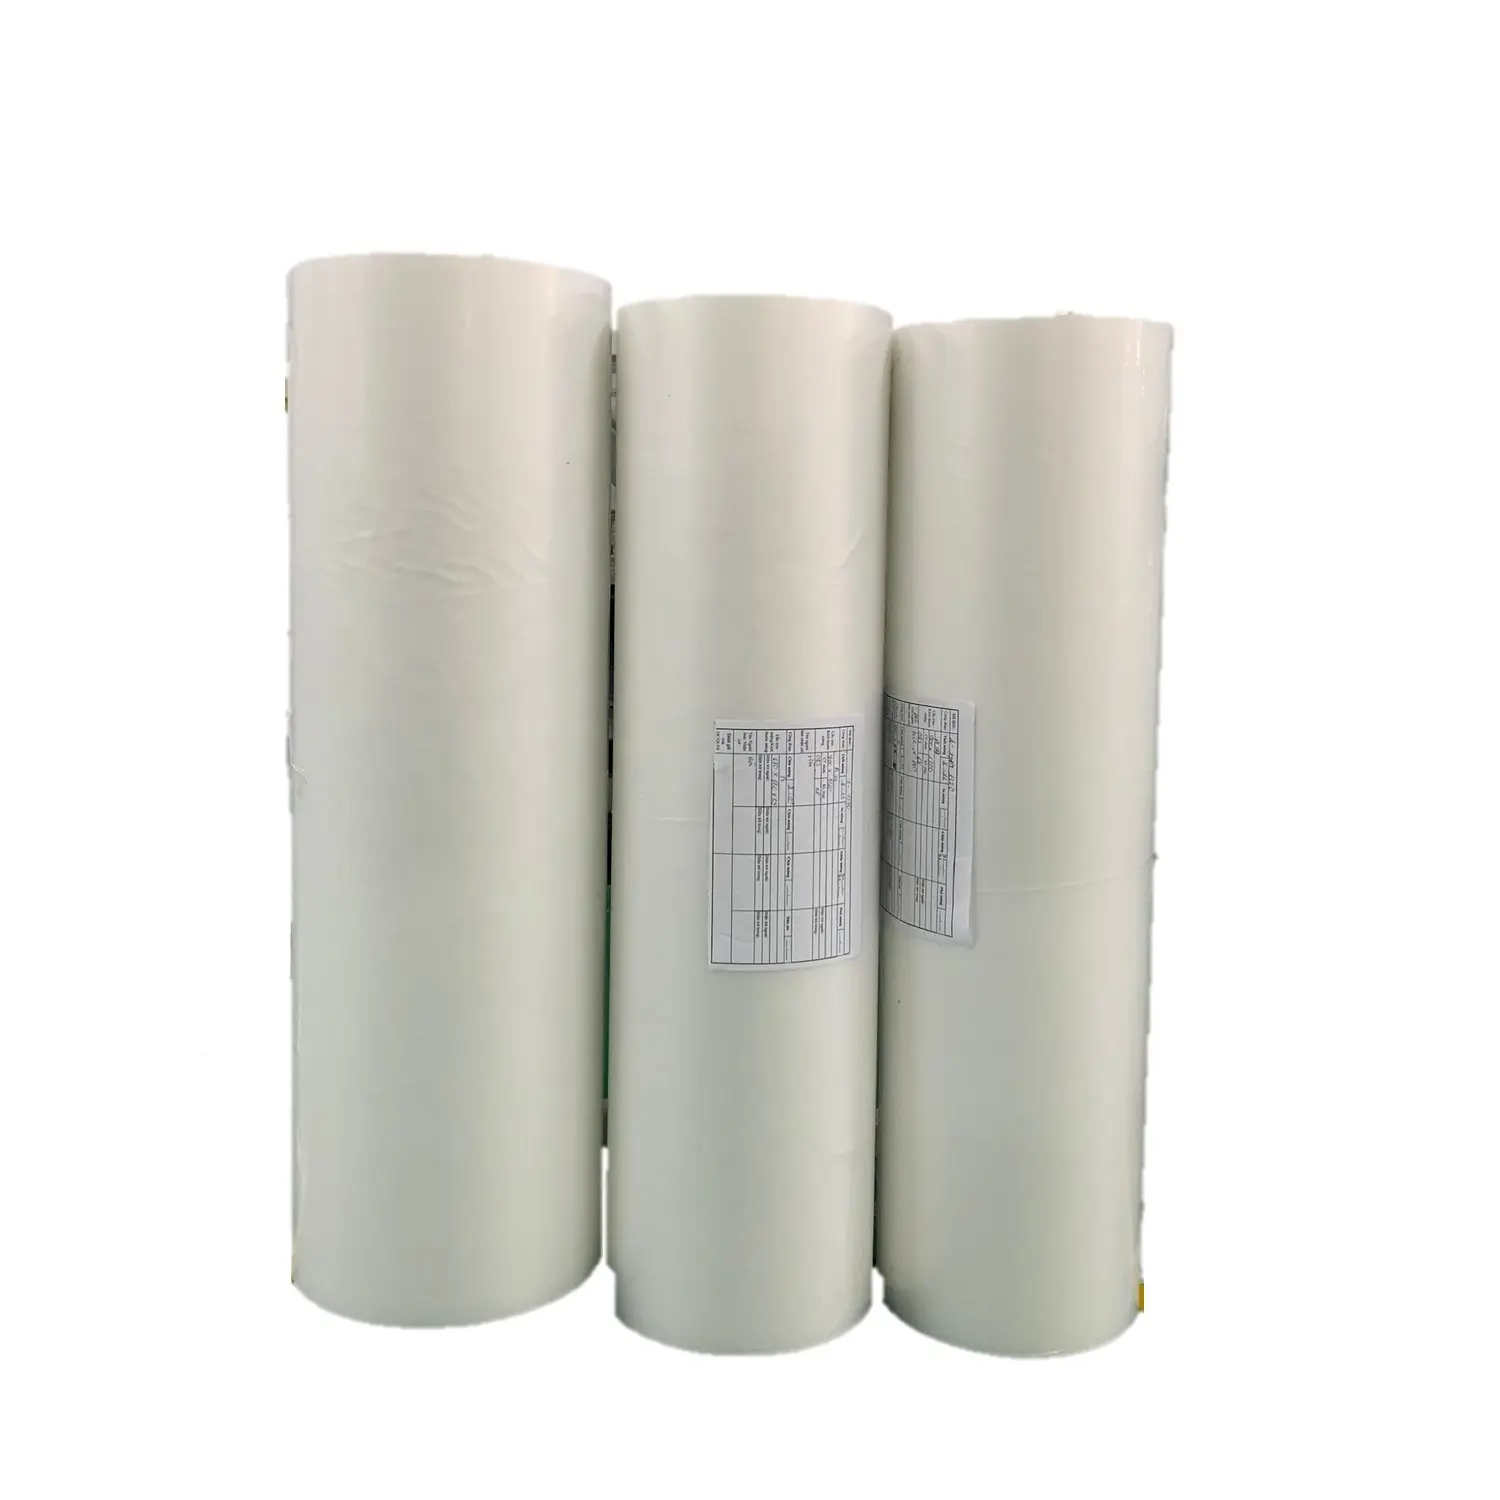 PE Film Dust Proof For Covering Pallets, Funiture, Agriculture and Industrial Packaging